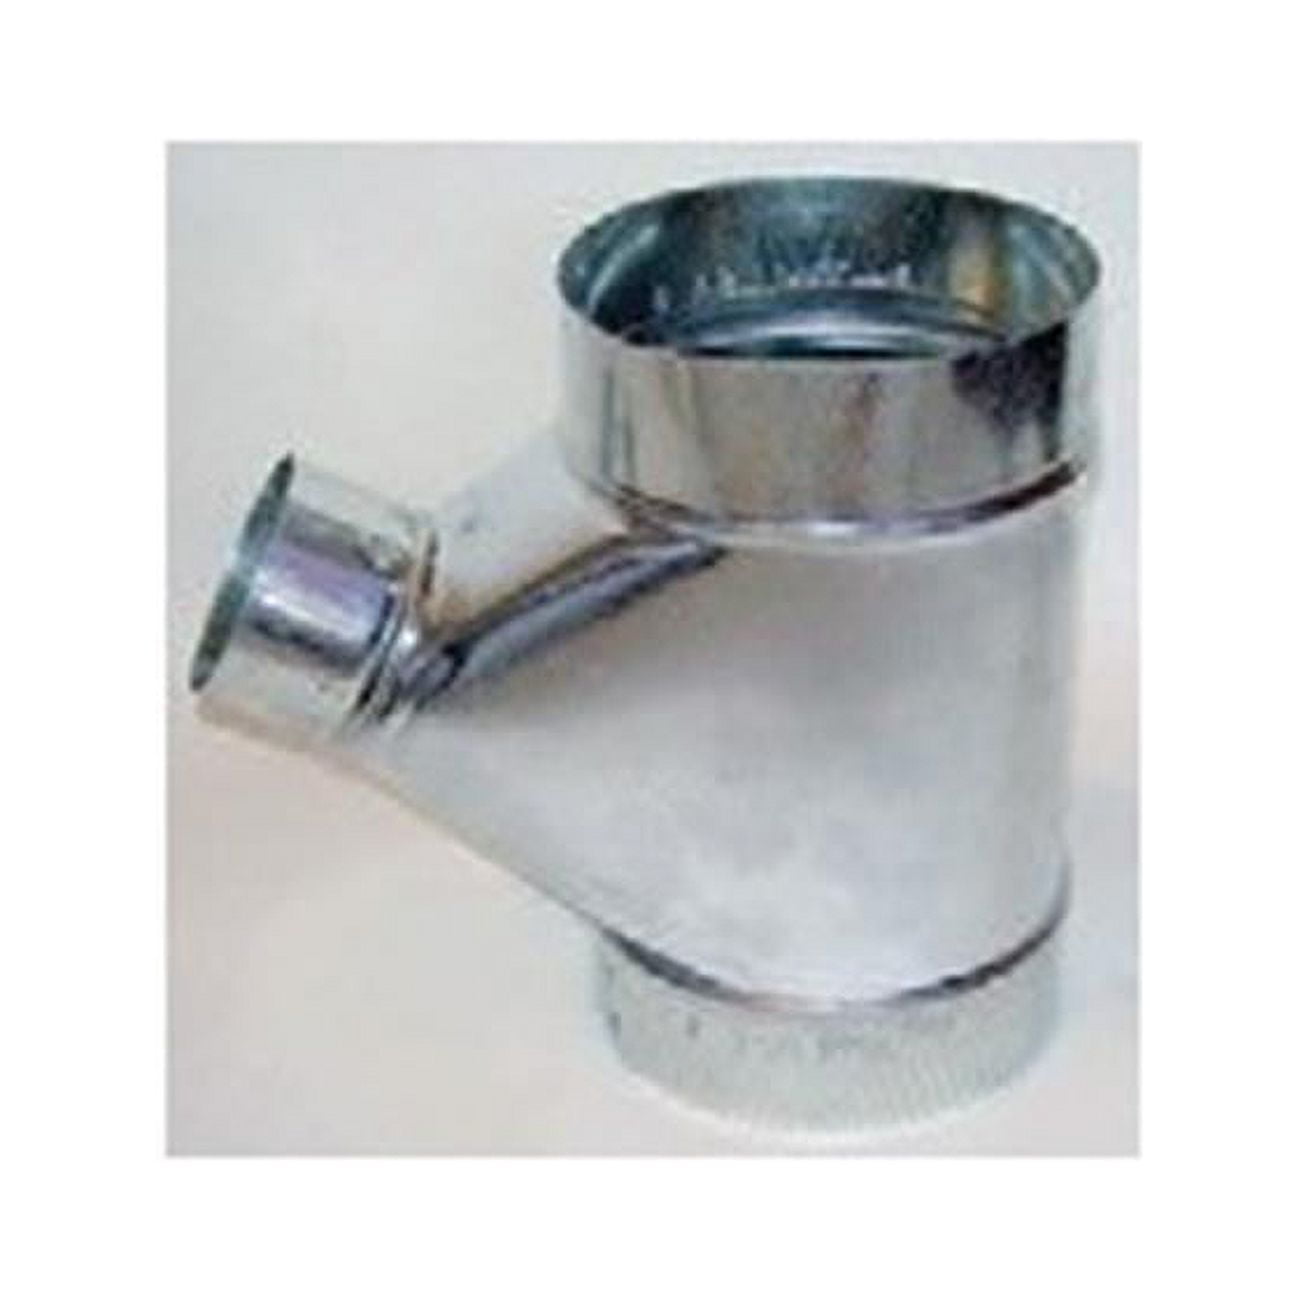 3603026 8 X 8 X 8 In. Galvanized Connector Wye Pipe